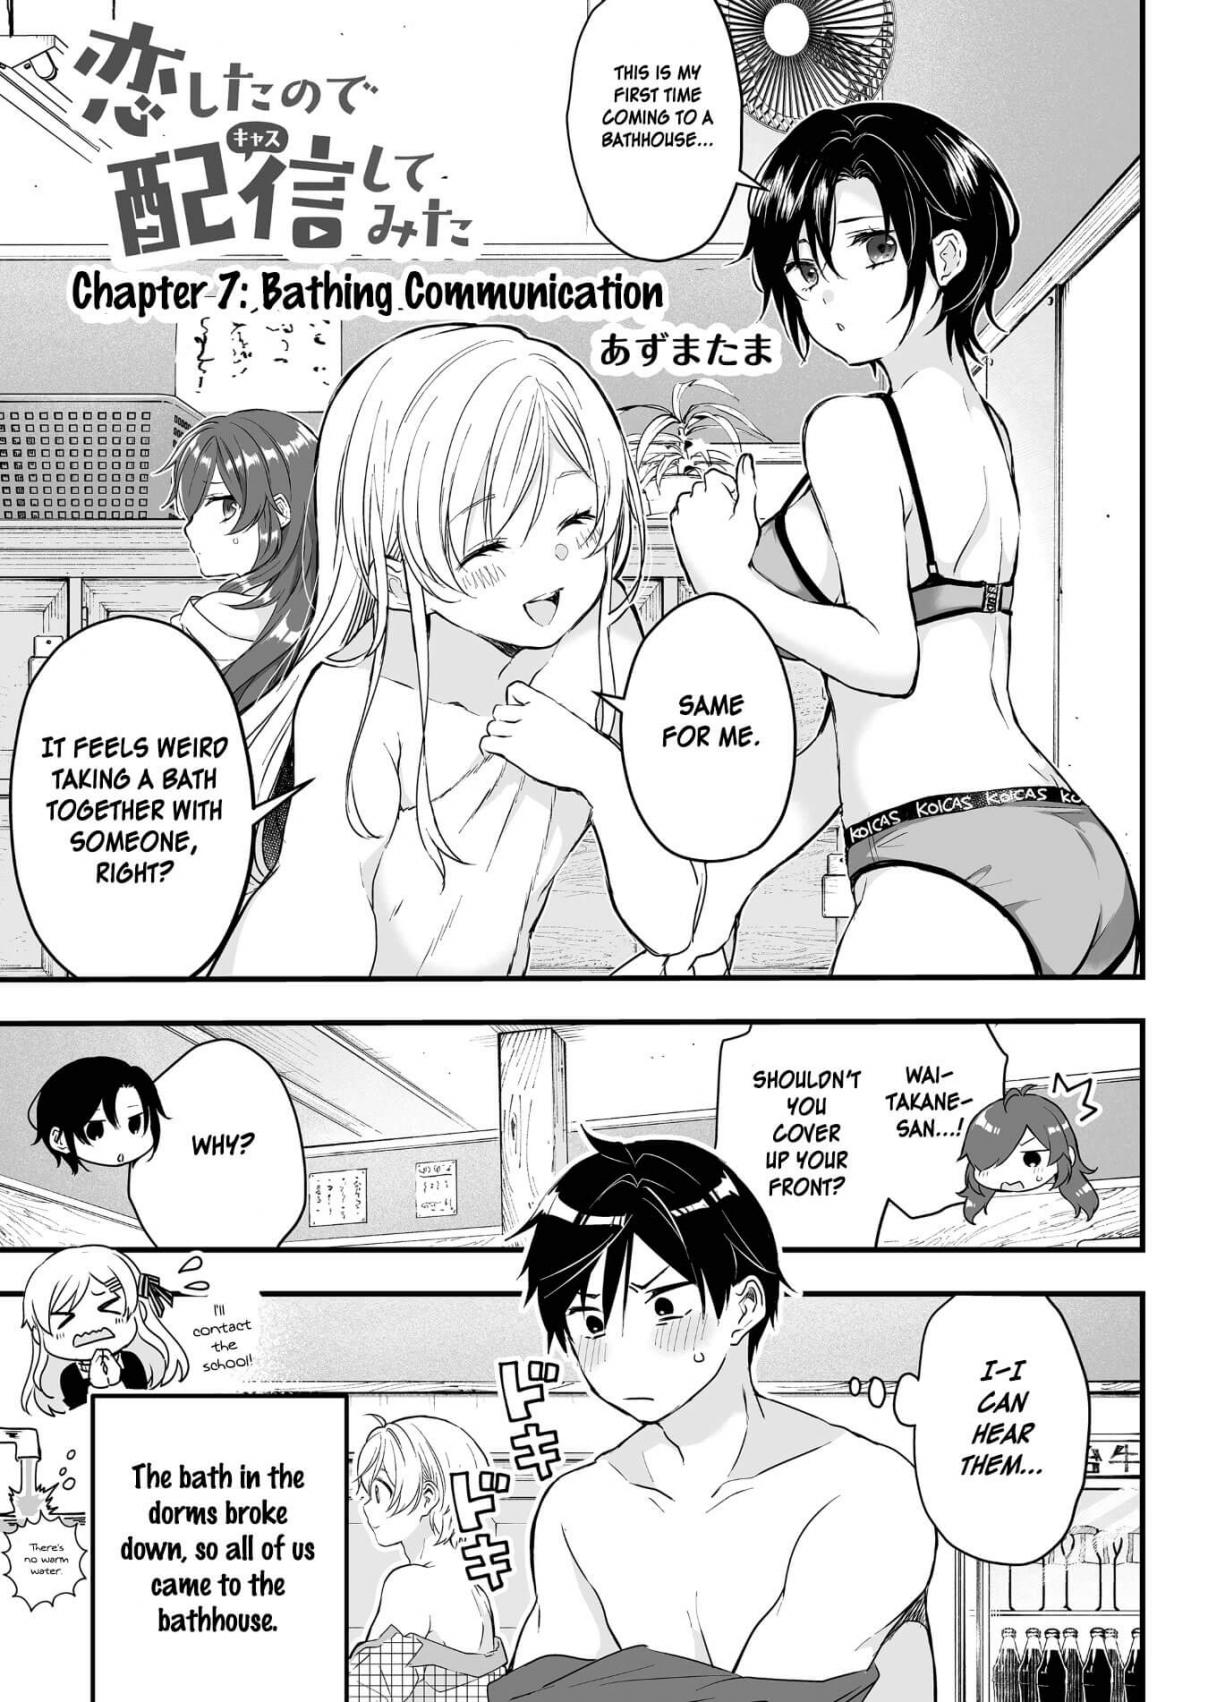 I Fell in Love, so I Tried Livestreaming Ch. 7 Bathing Communication